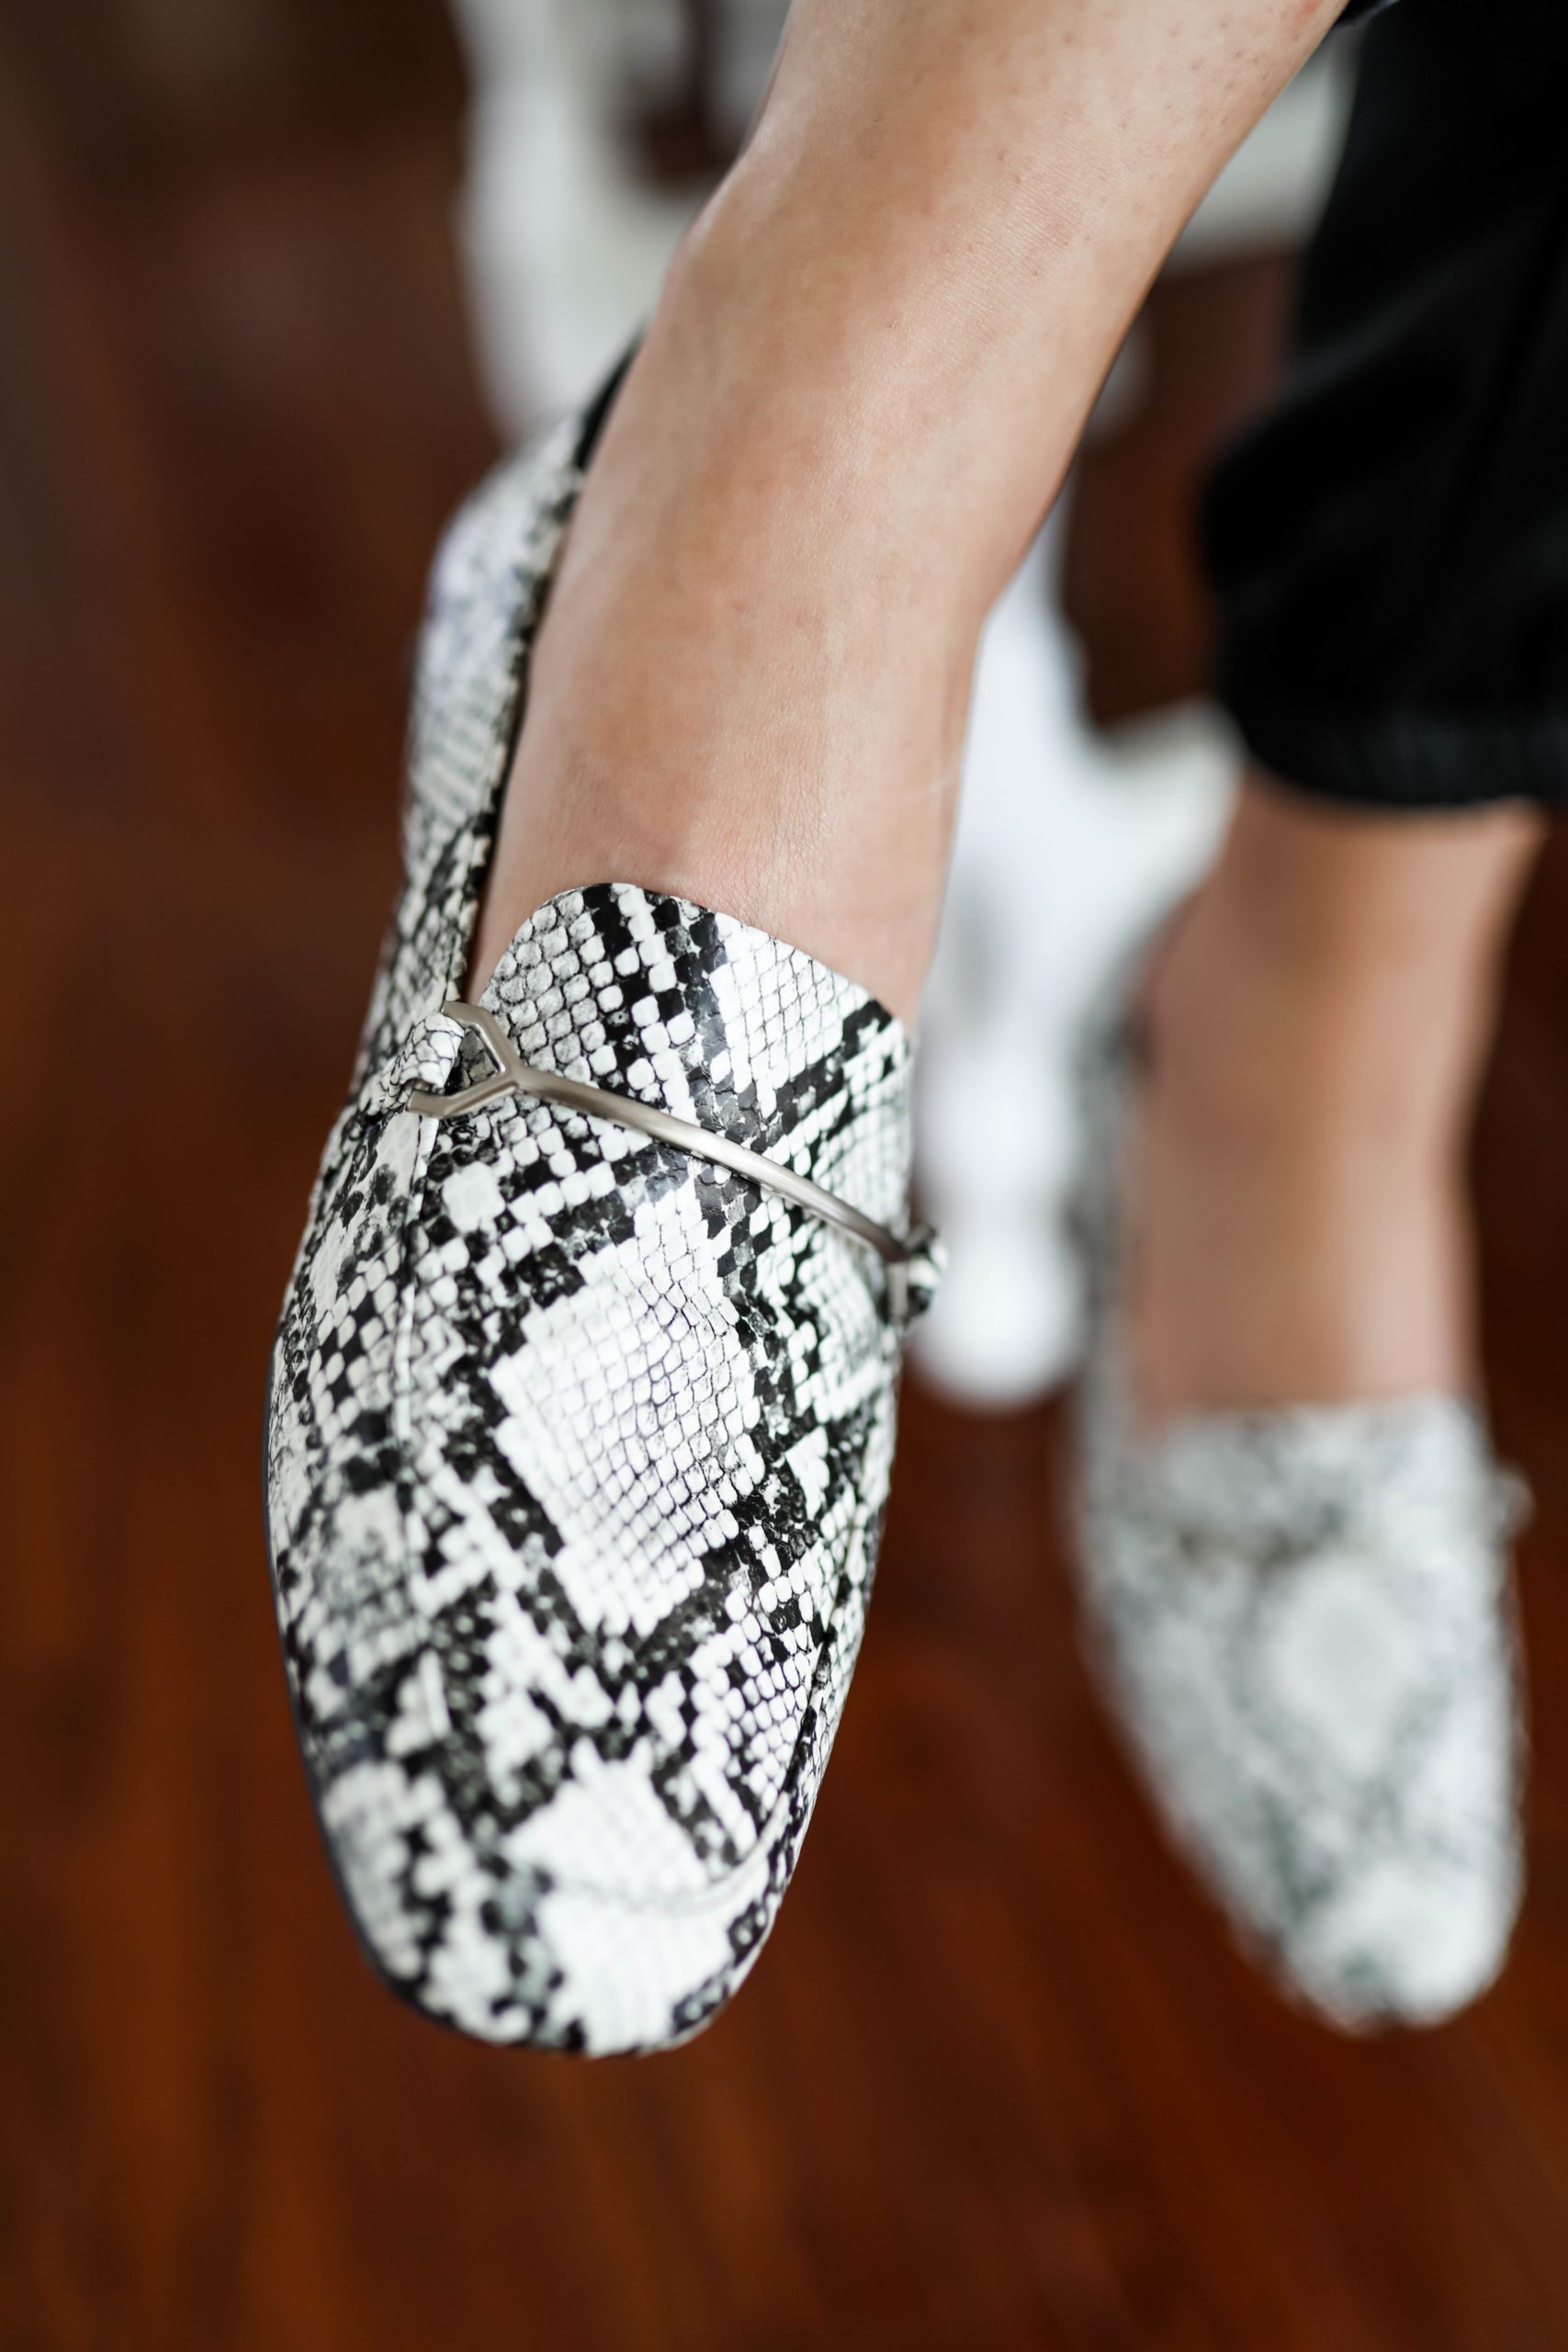 Snakeskin Loafers - WORK-FROM-HOME STYLE GUIDE from the Nordstrom Anniversary Sale - The Best COMFY Workwear on sale now! - on Coming Up Roses